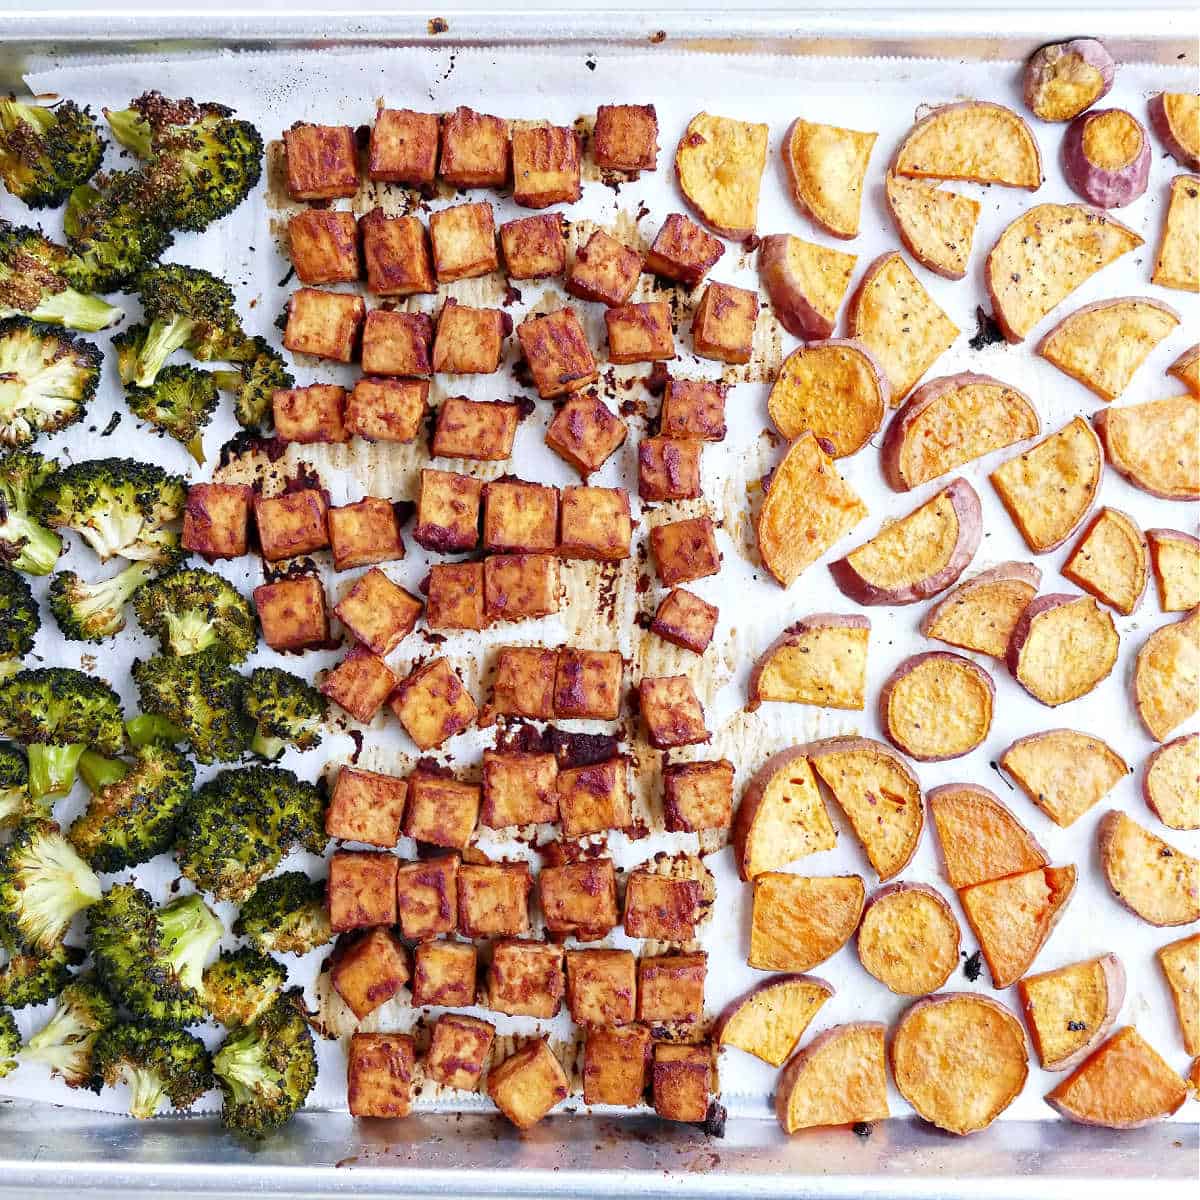 Sheet pan bbq marinated tofu with yams and broccoli after cooking.